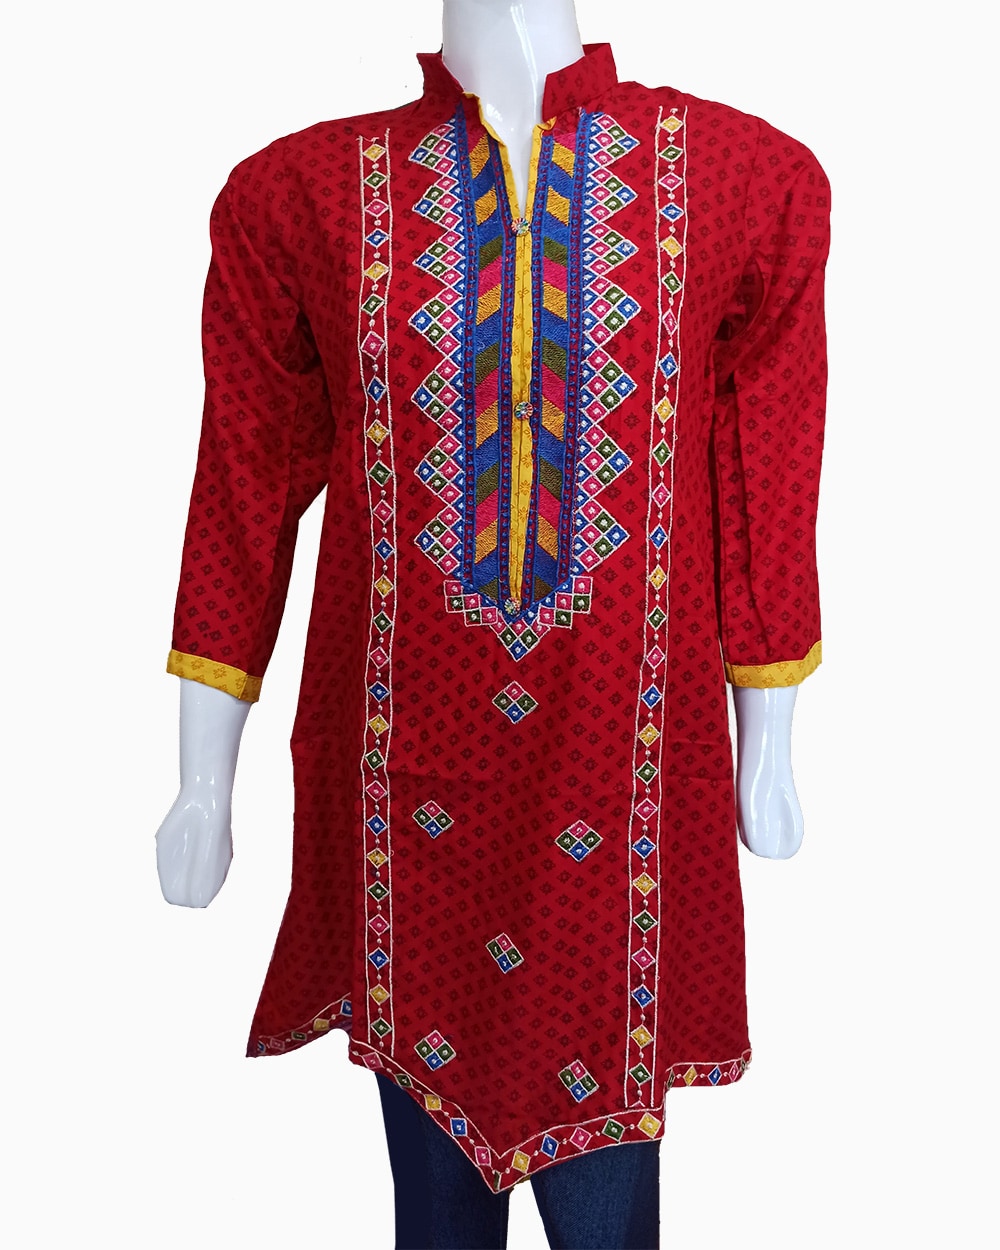 Balochi cultural embroidered shirt-all over embroidered shirt-buy cultural fashion online-red with contrast embroidered neckline (3)